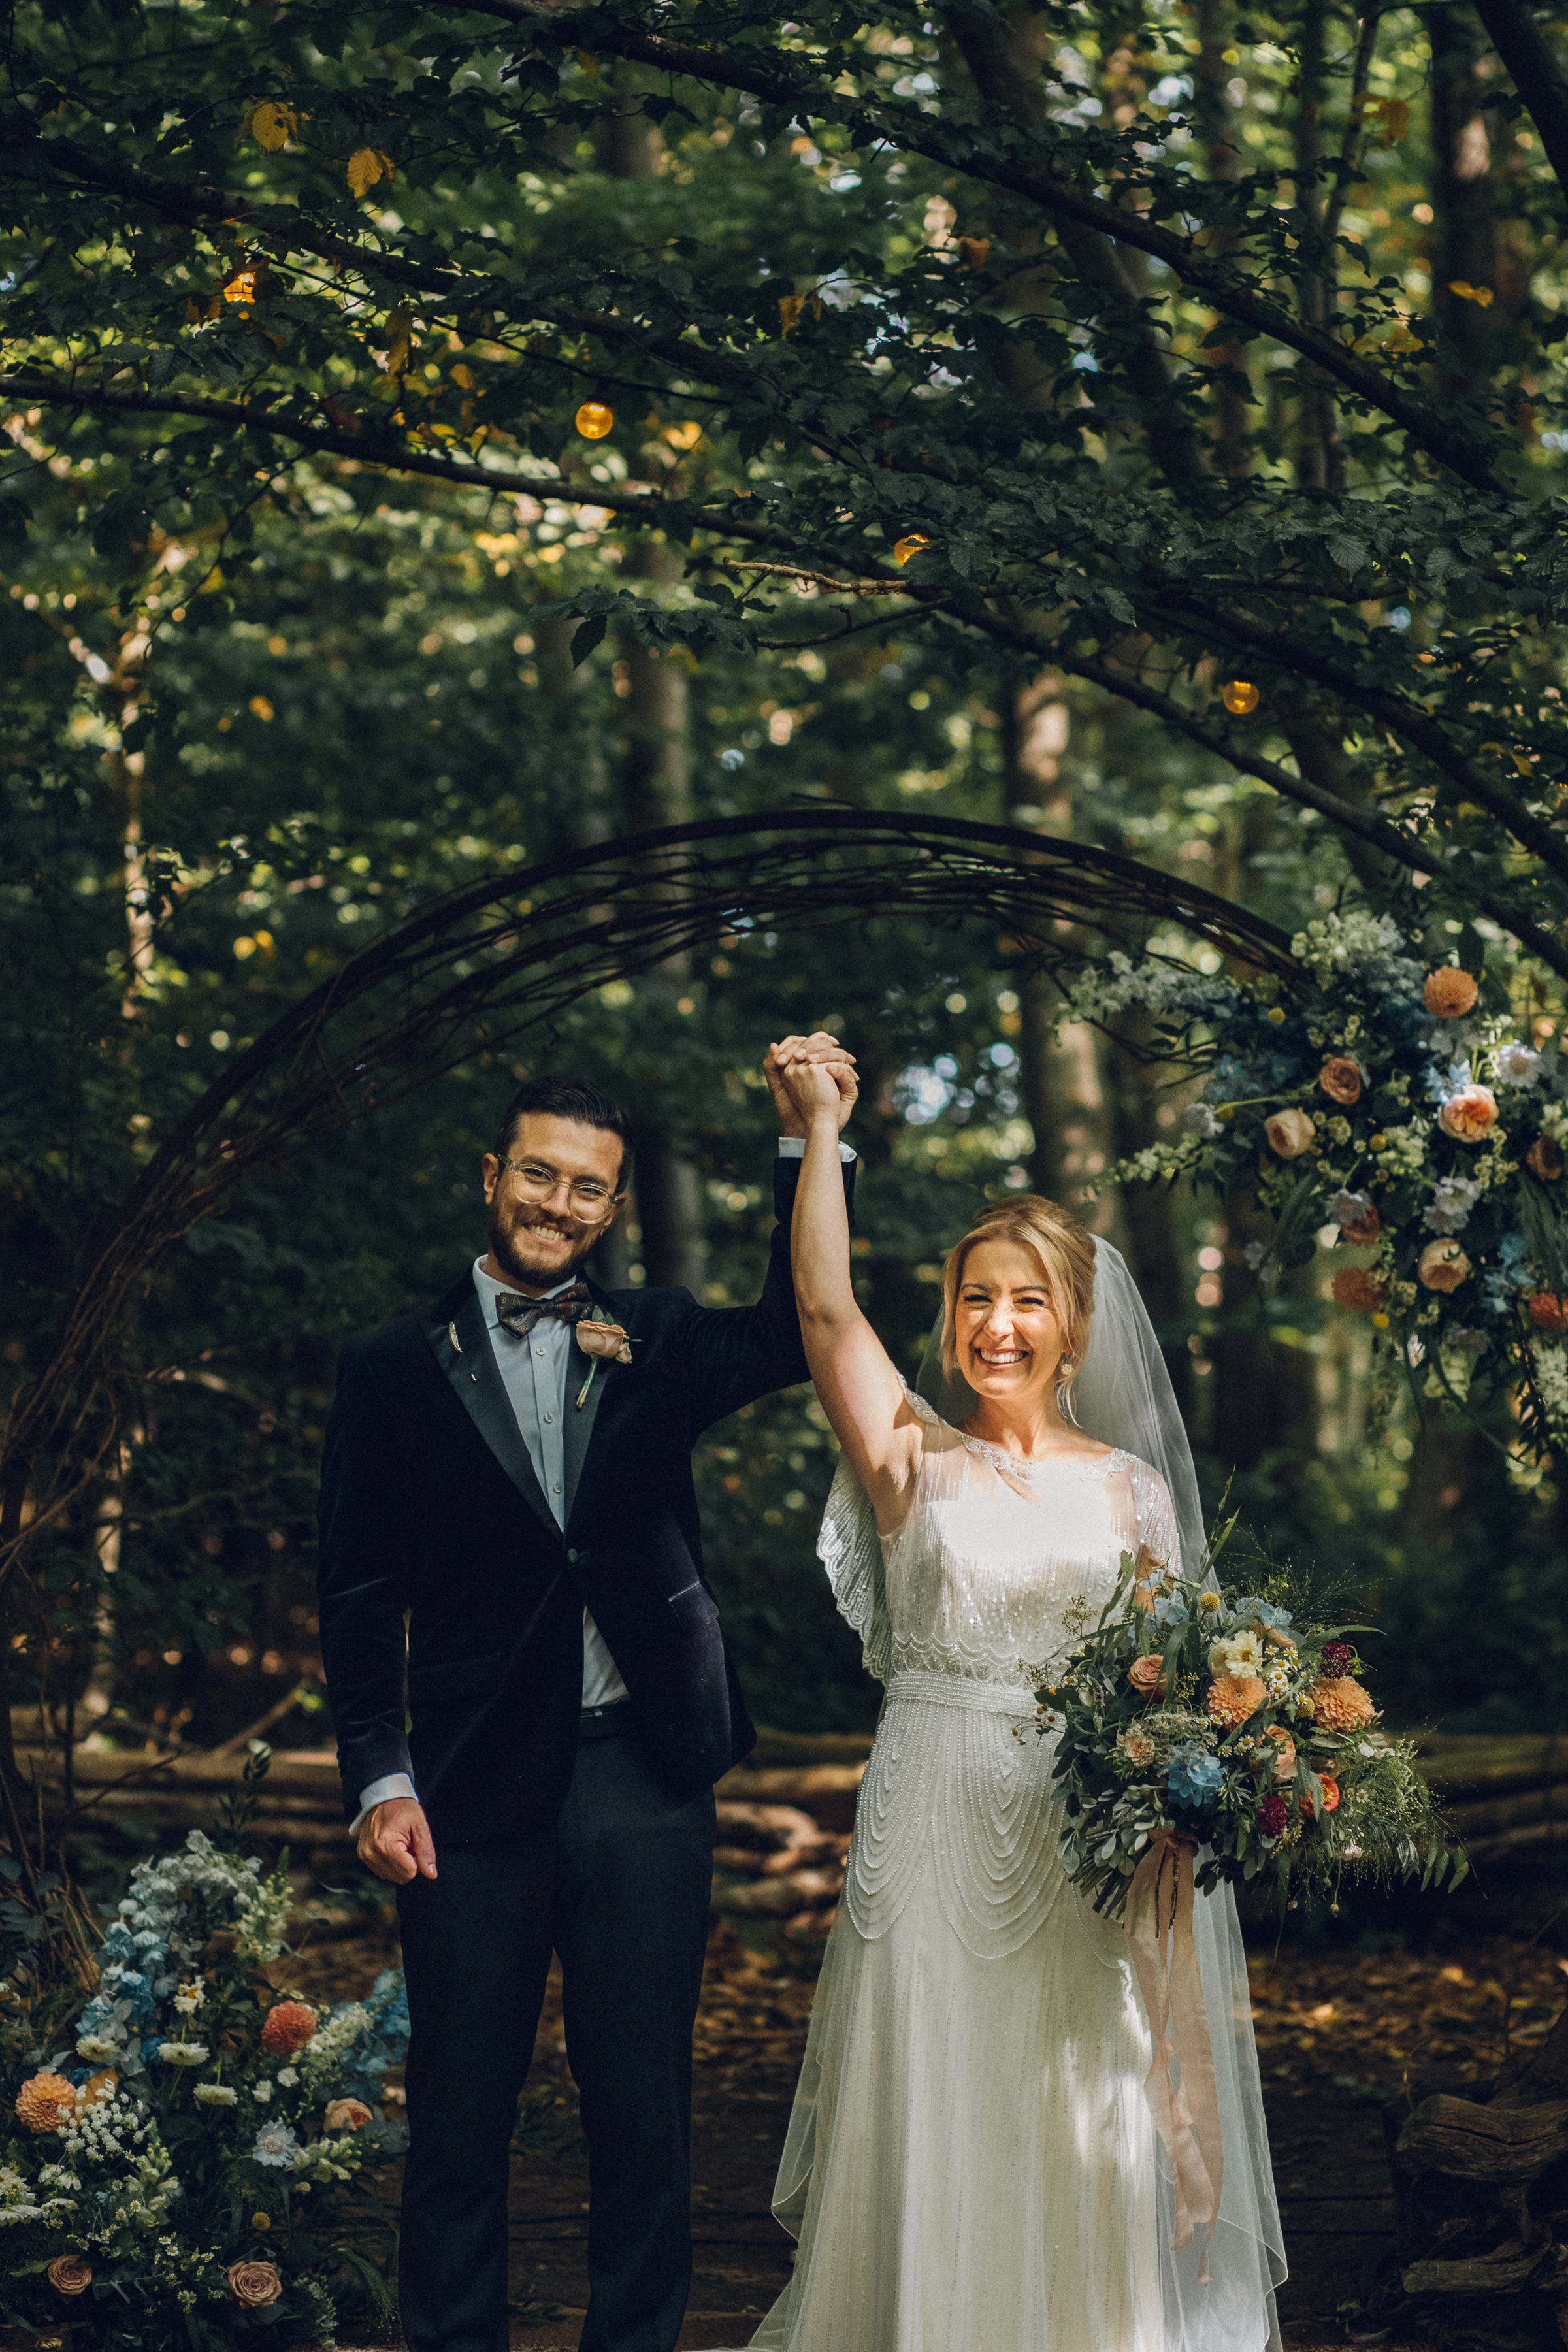 A bride and groom raise their hands together infront of a wooded area